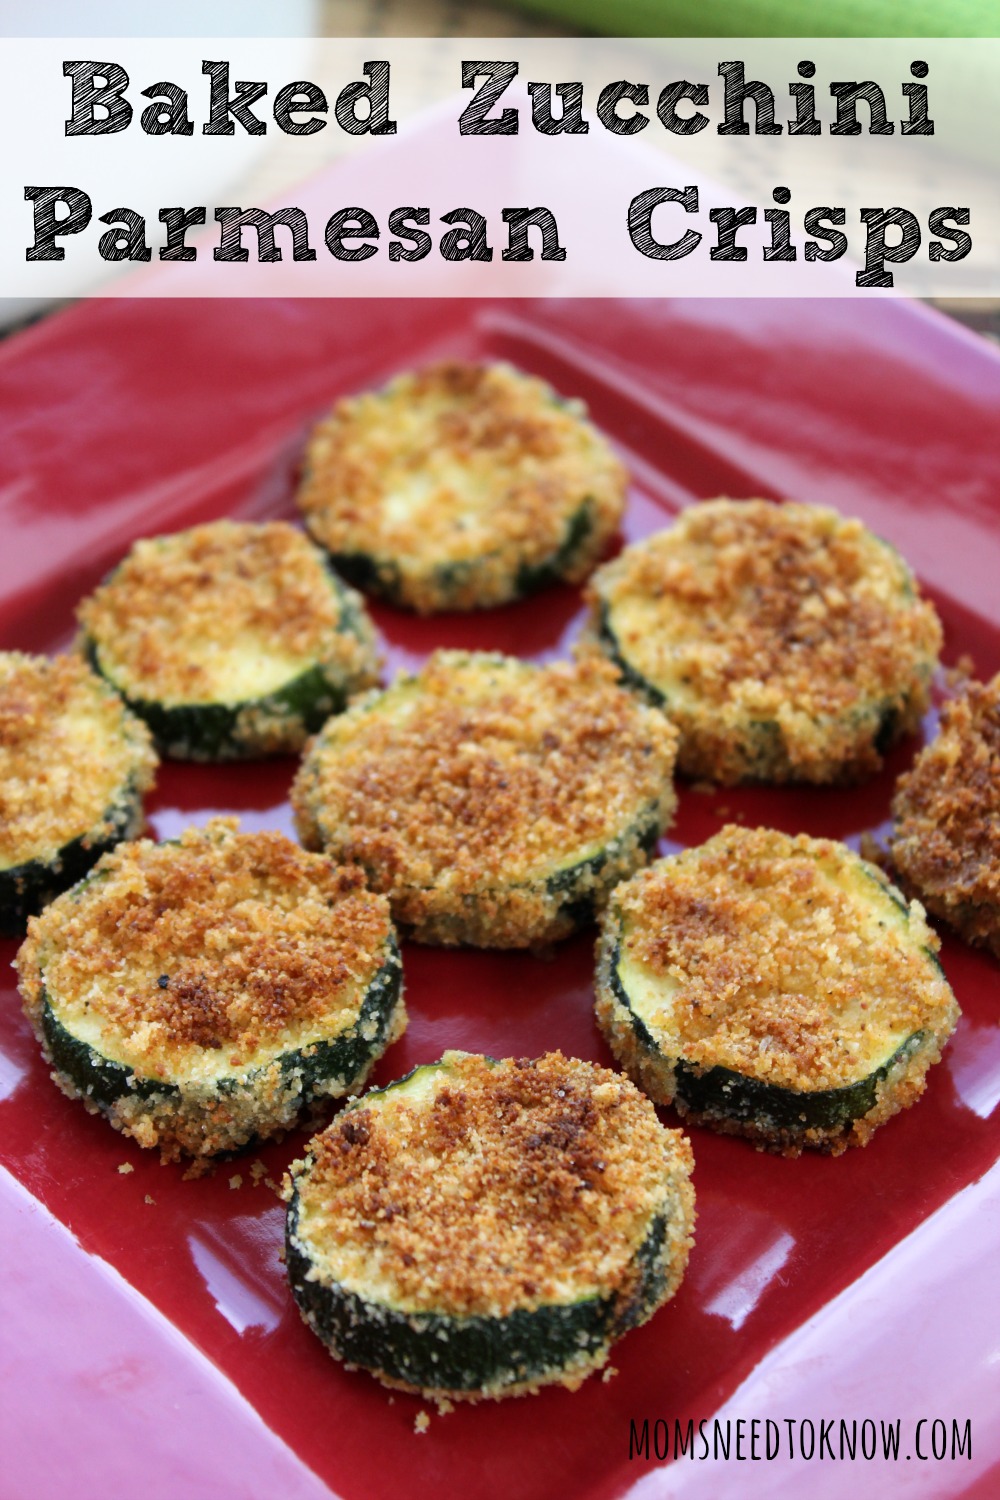 If you are looking for a healthy snack, try these baked zucchini Parmesan chips!  So easy to make and will satisfy your need for a crunch!